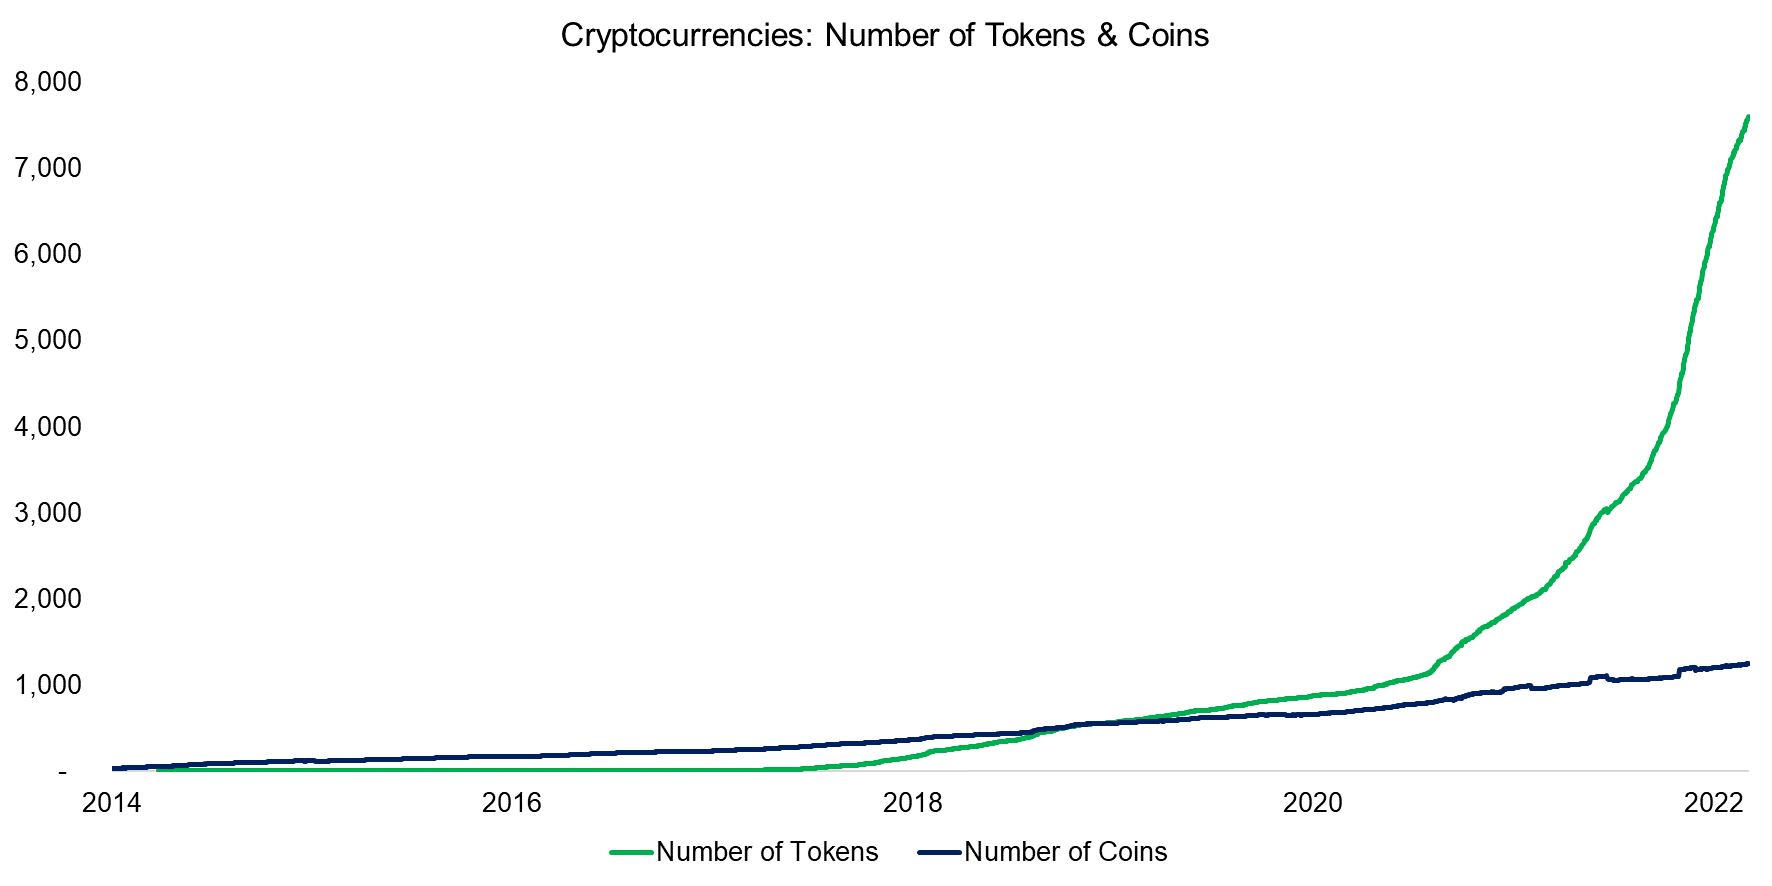 Cryptocurrencies Number of Tokens & Coins